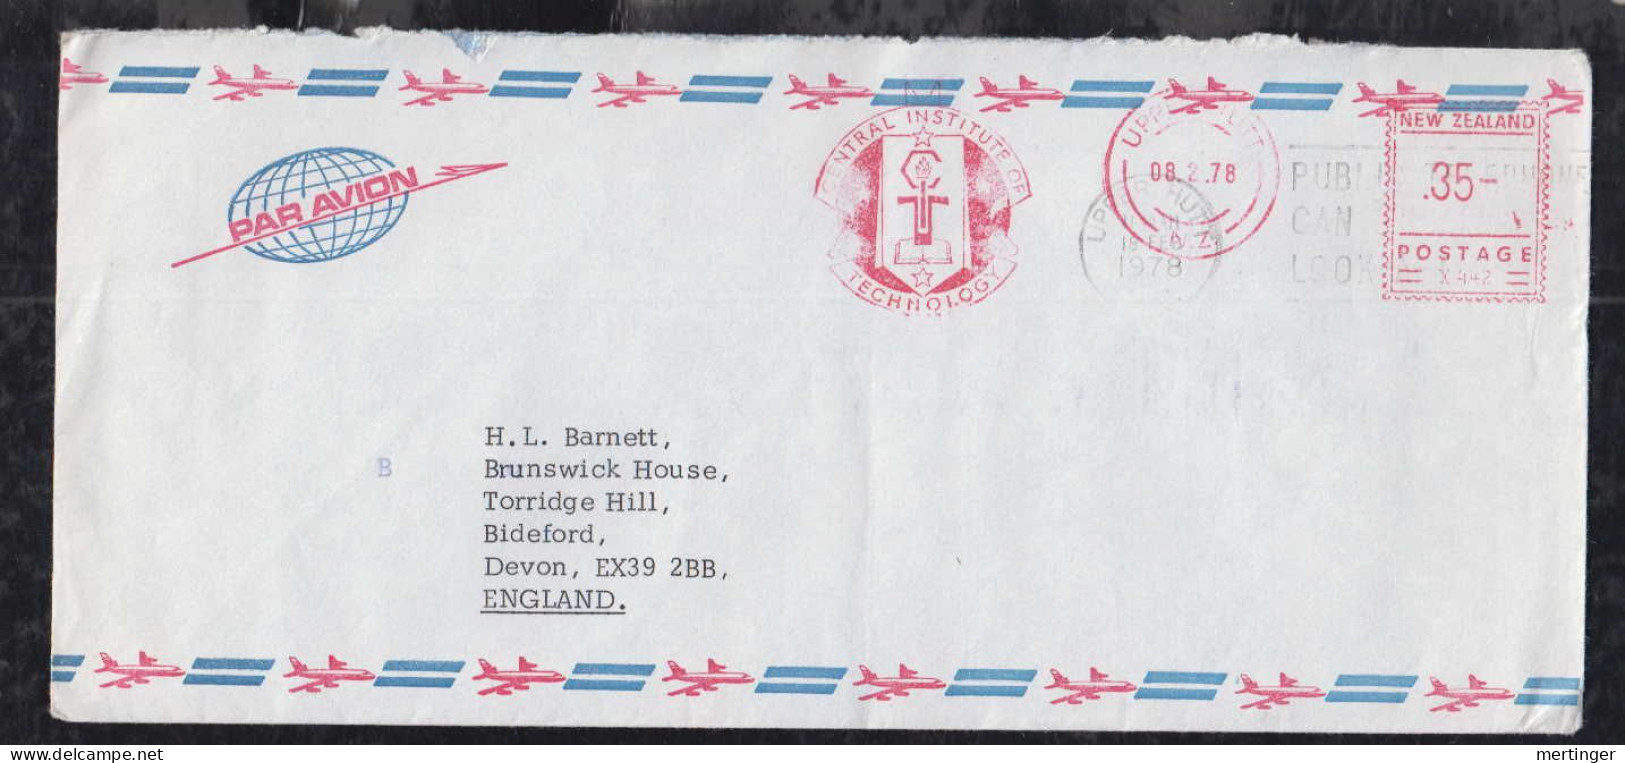 New Zealand 1978 Meter Airmail Cover 35c UPPER HUTT To Bideford England Central Institute Of Technology - Covers & Documents